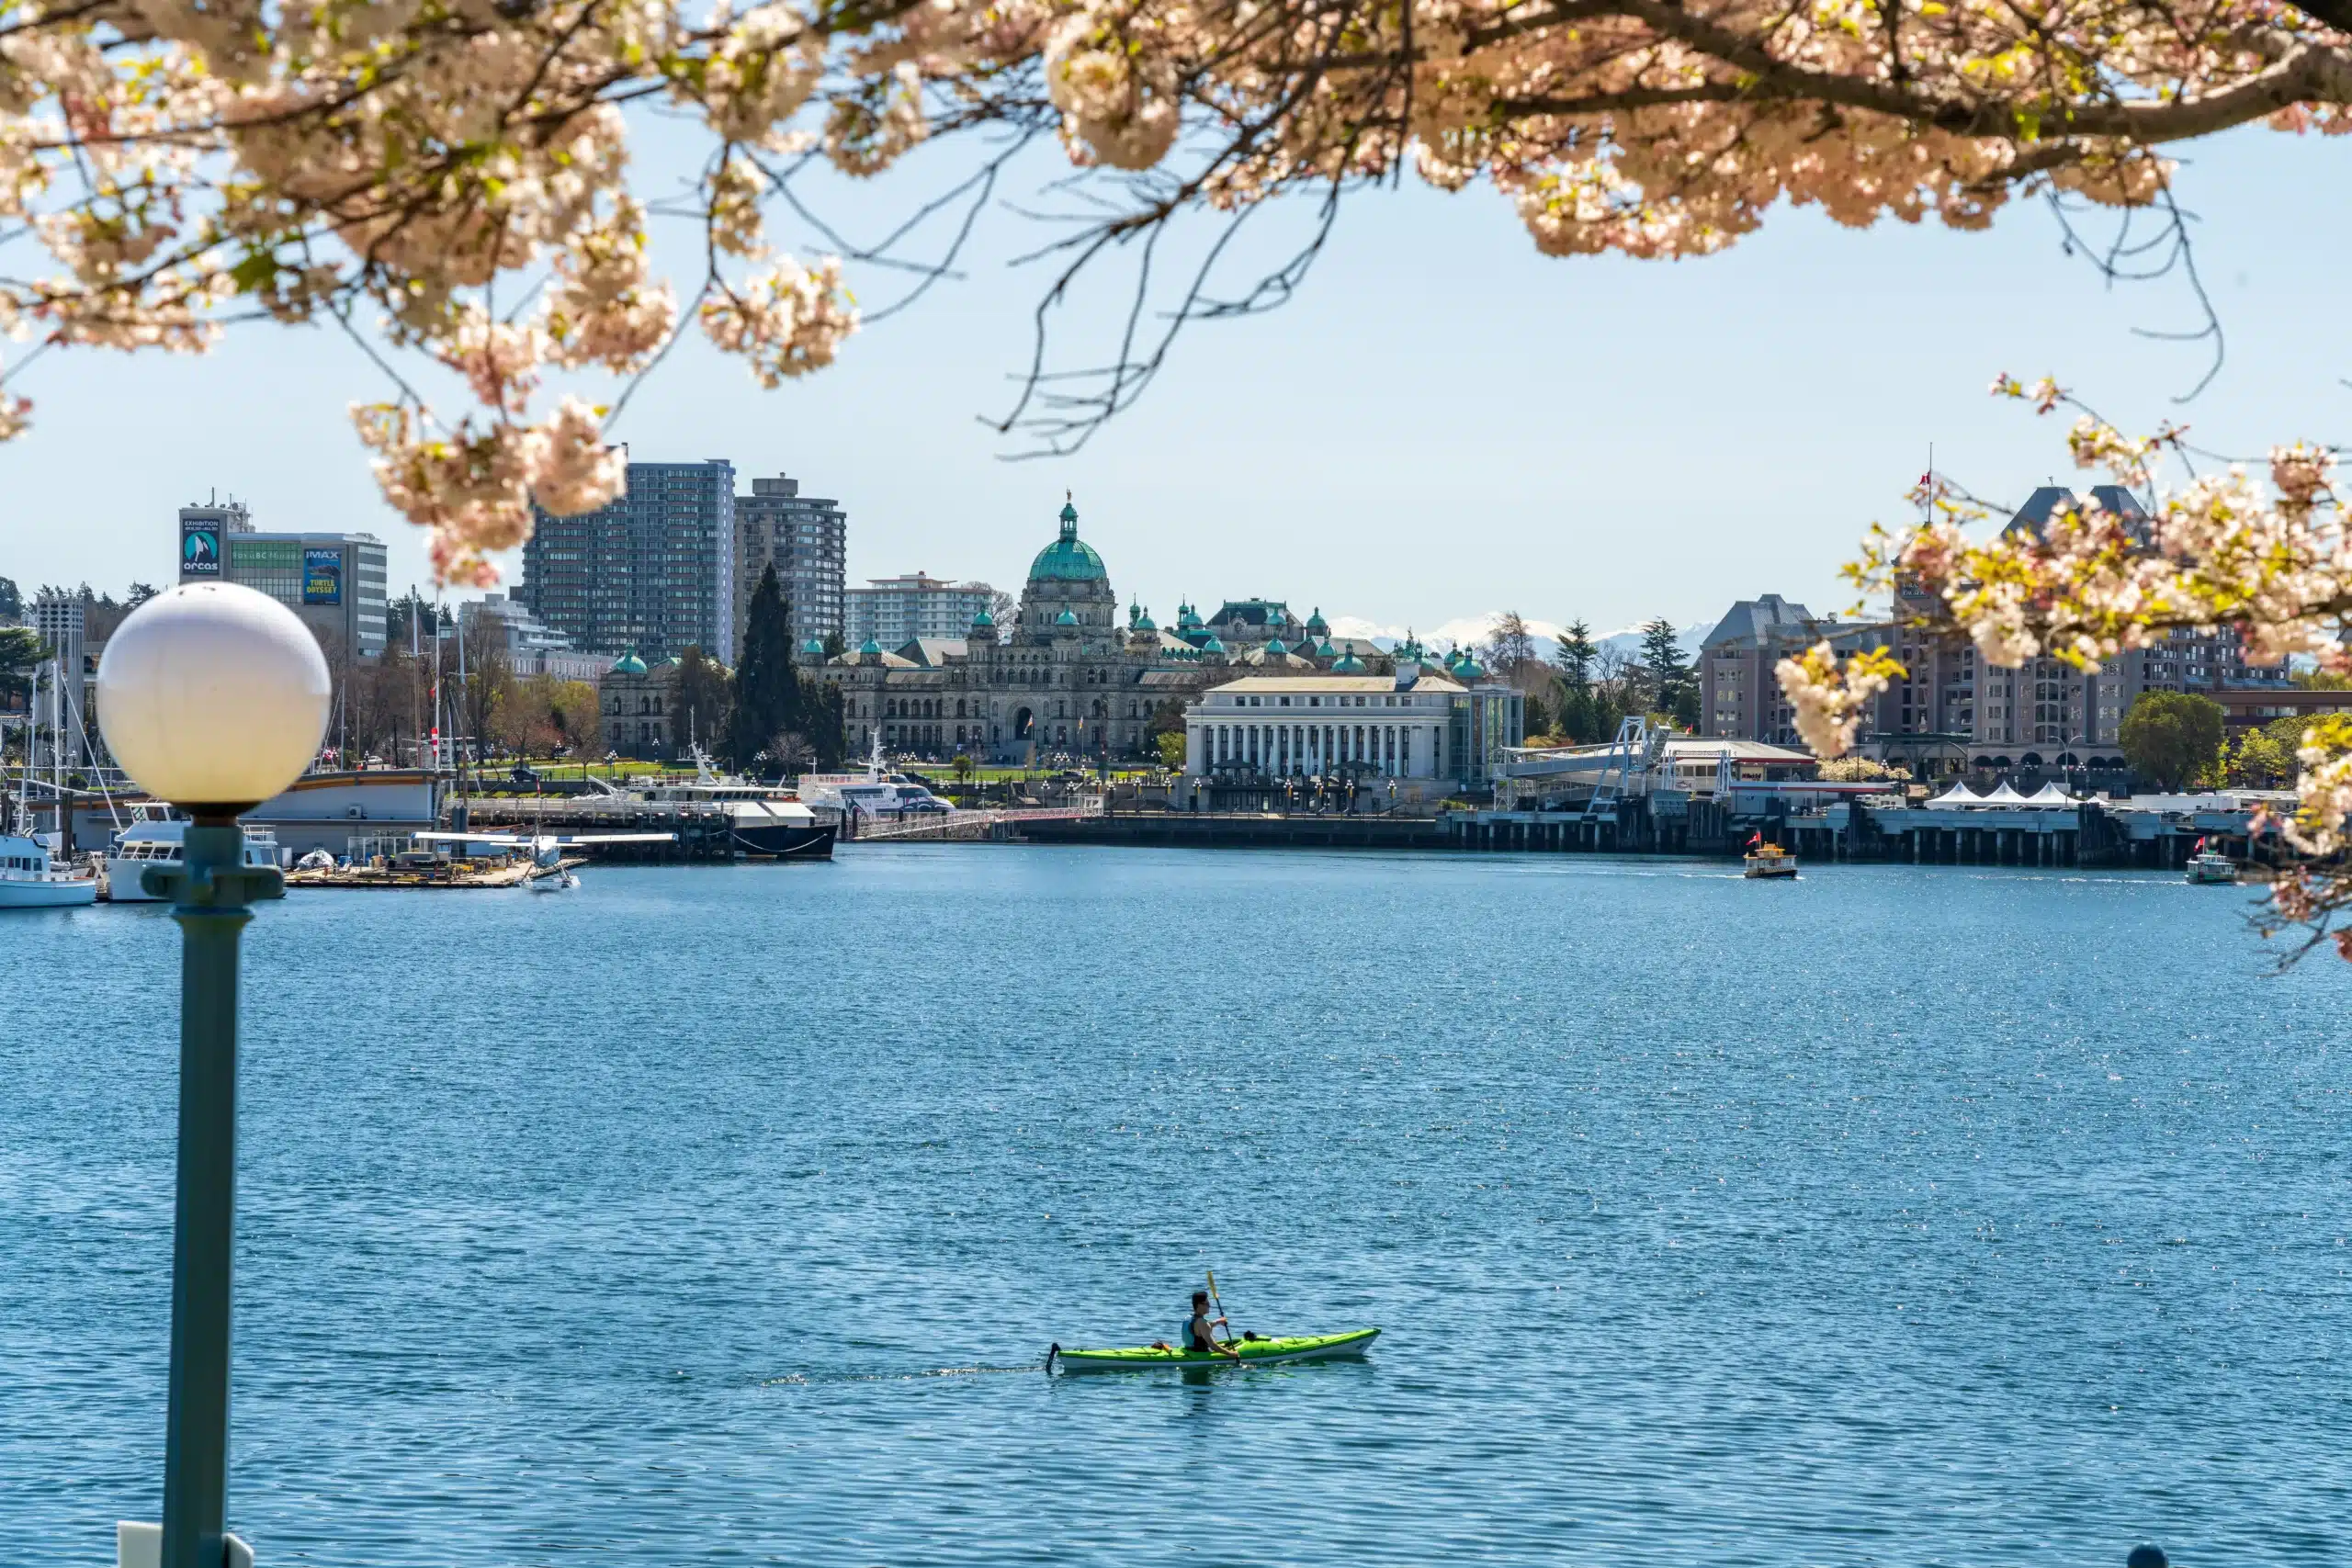 19 Things to Do in Victoria, BC from Shopping and Dining to Biking and Kayaking